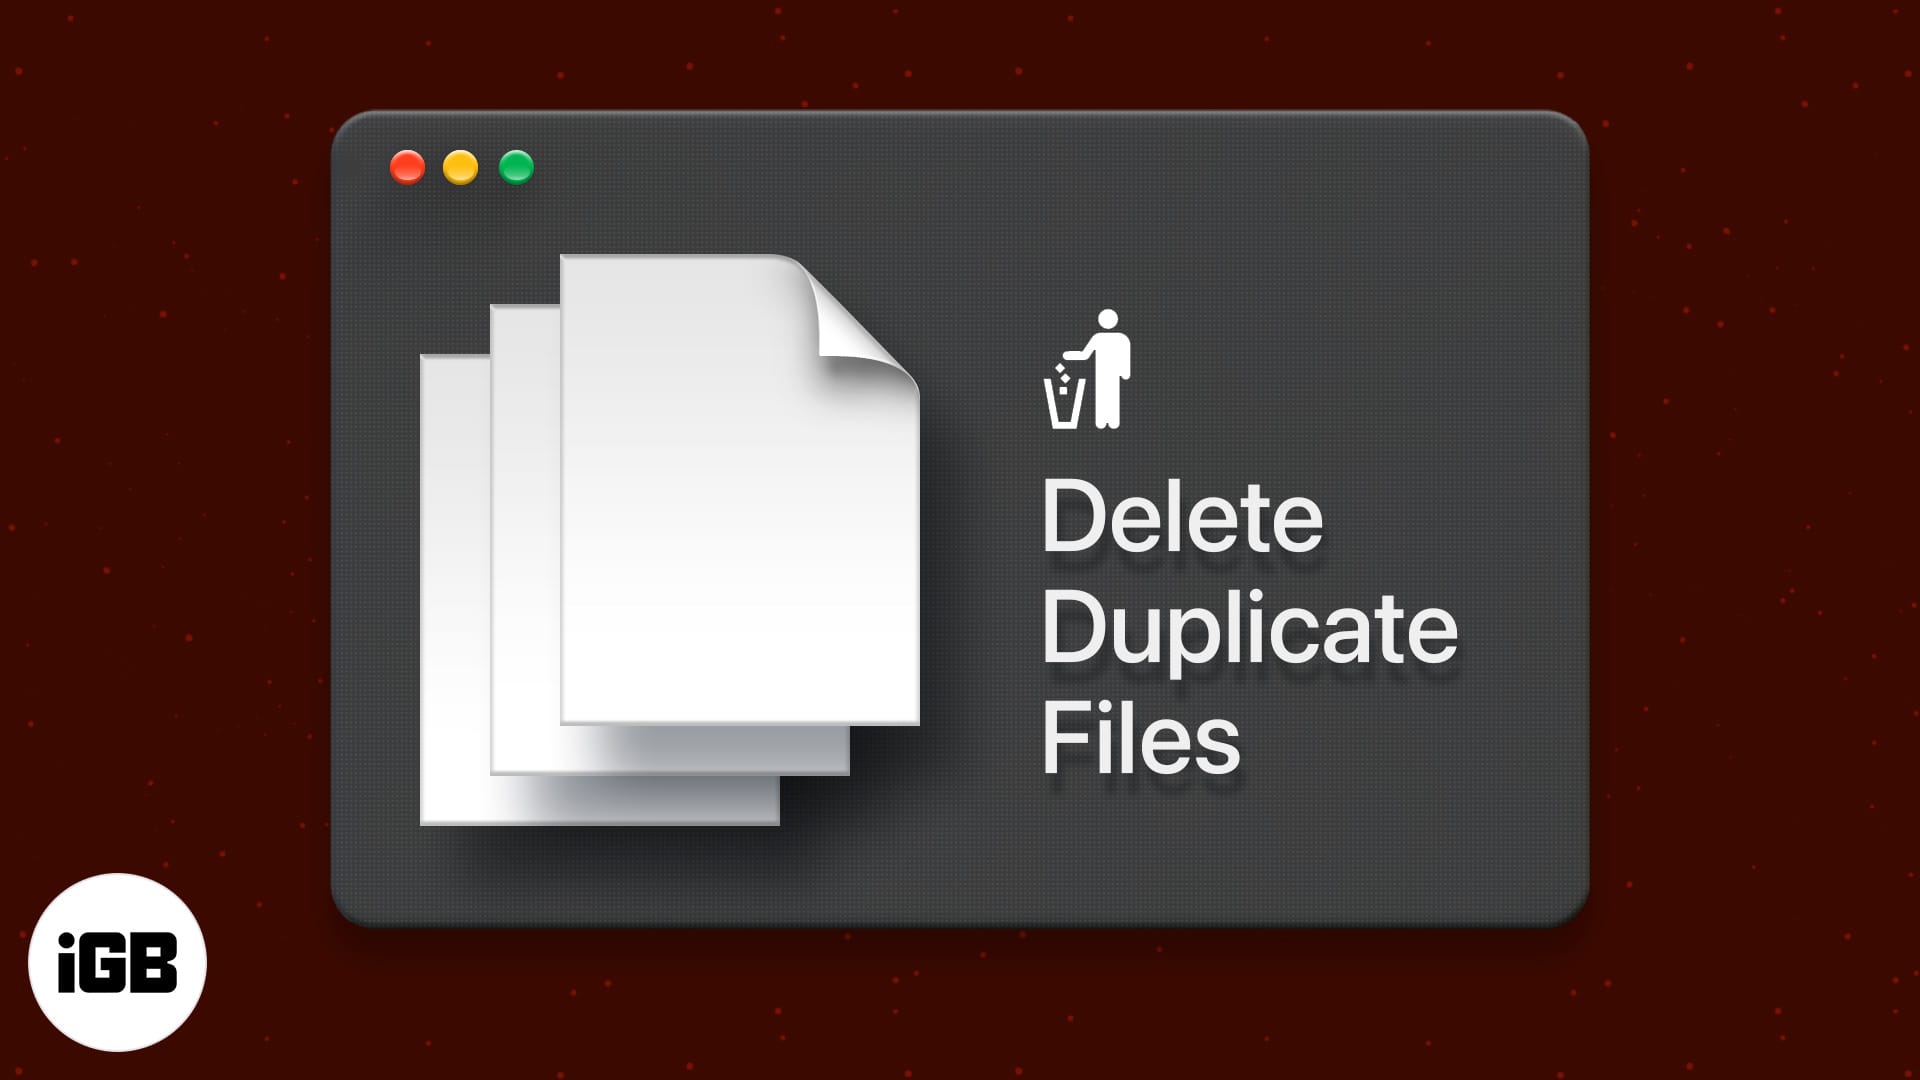 How to find and delete duplicate files on Mac